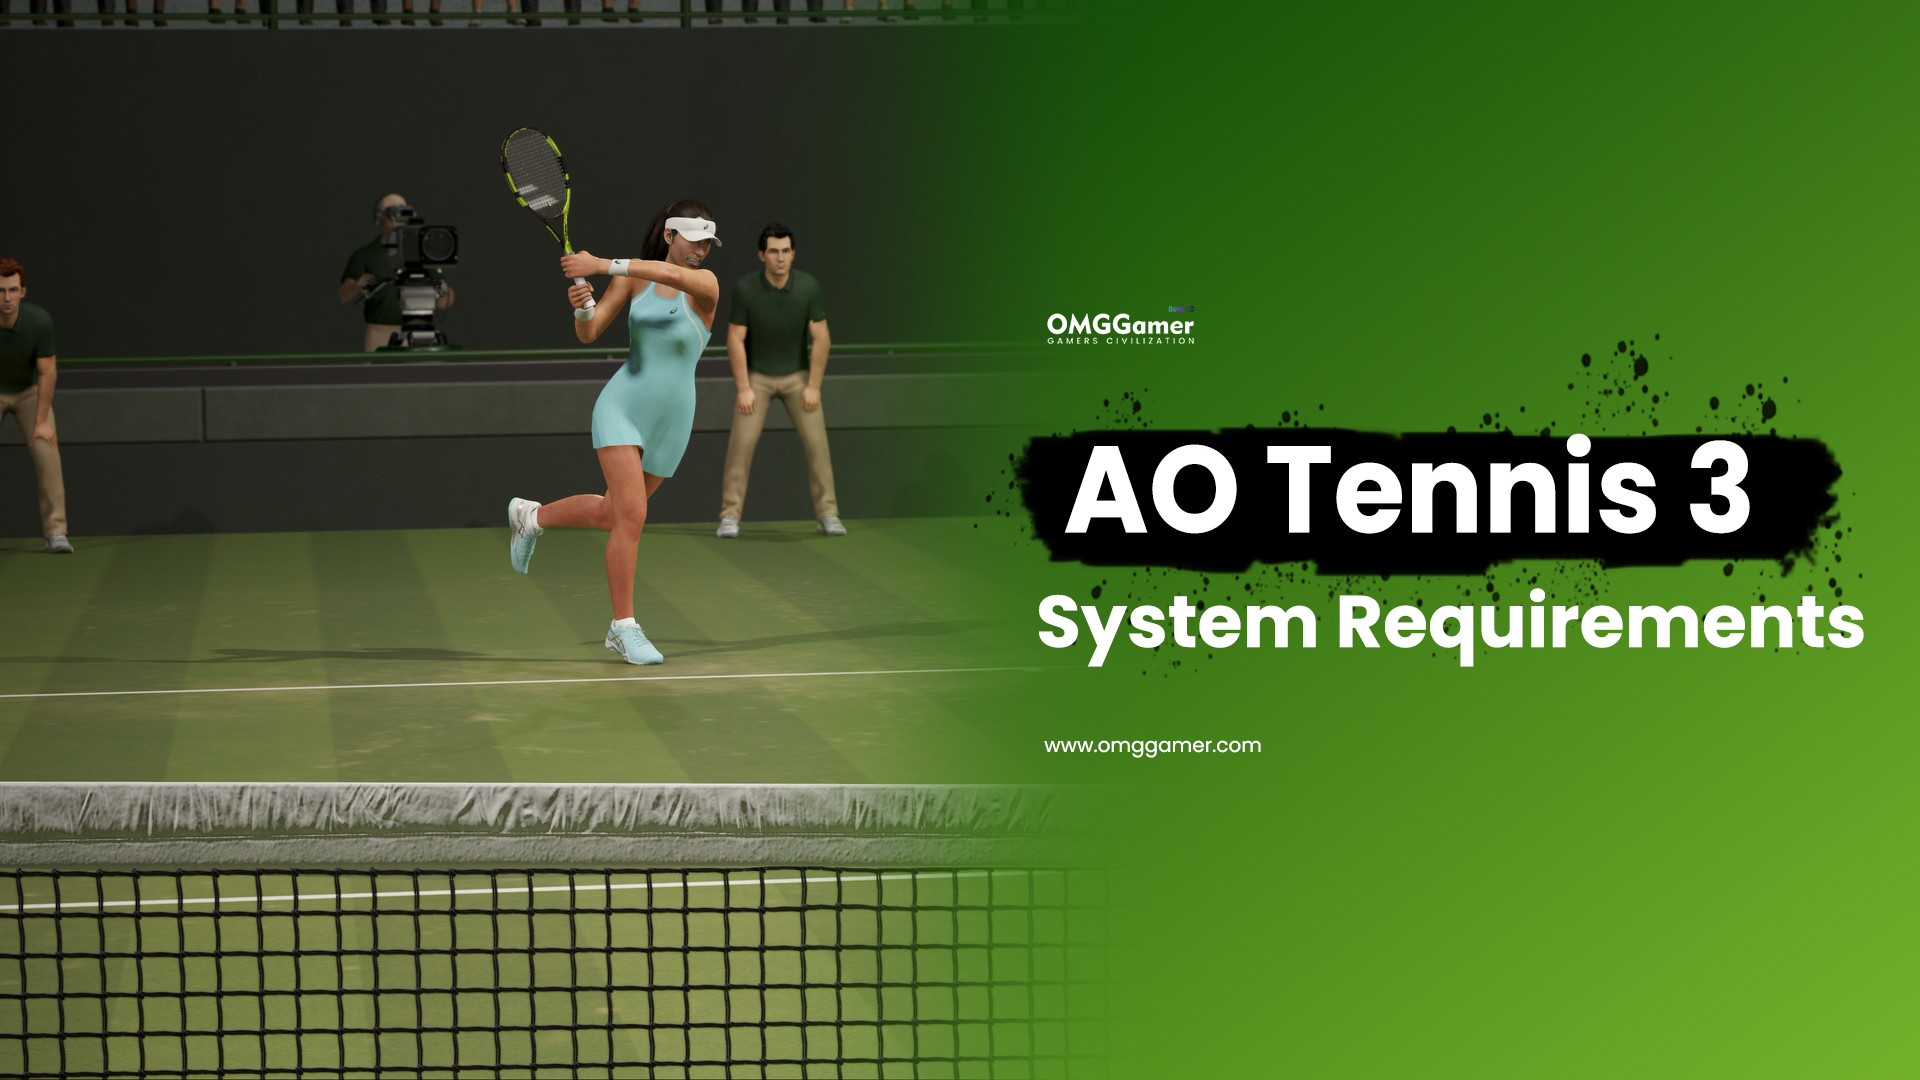 AO Tennis 3 System Requirements